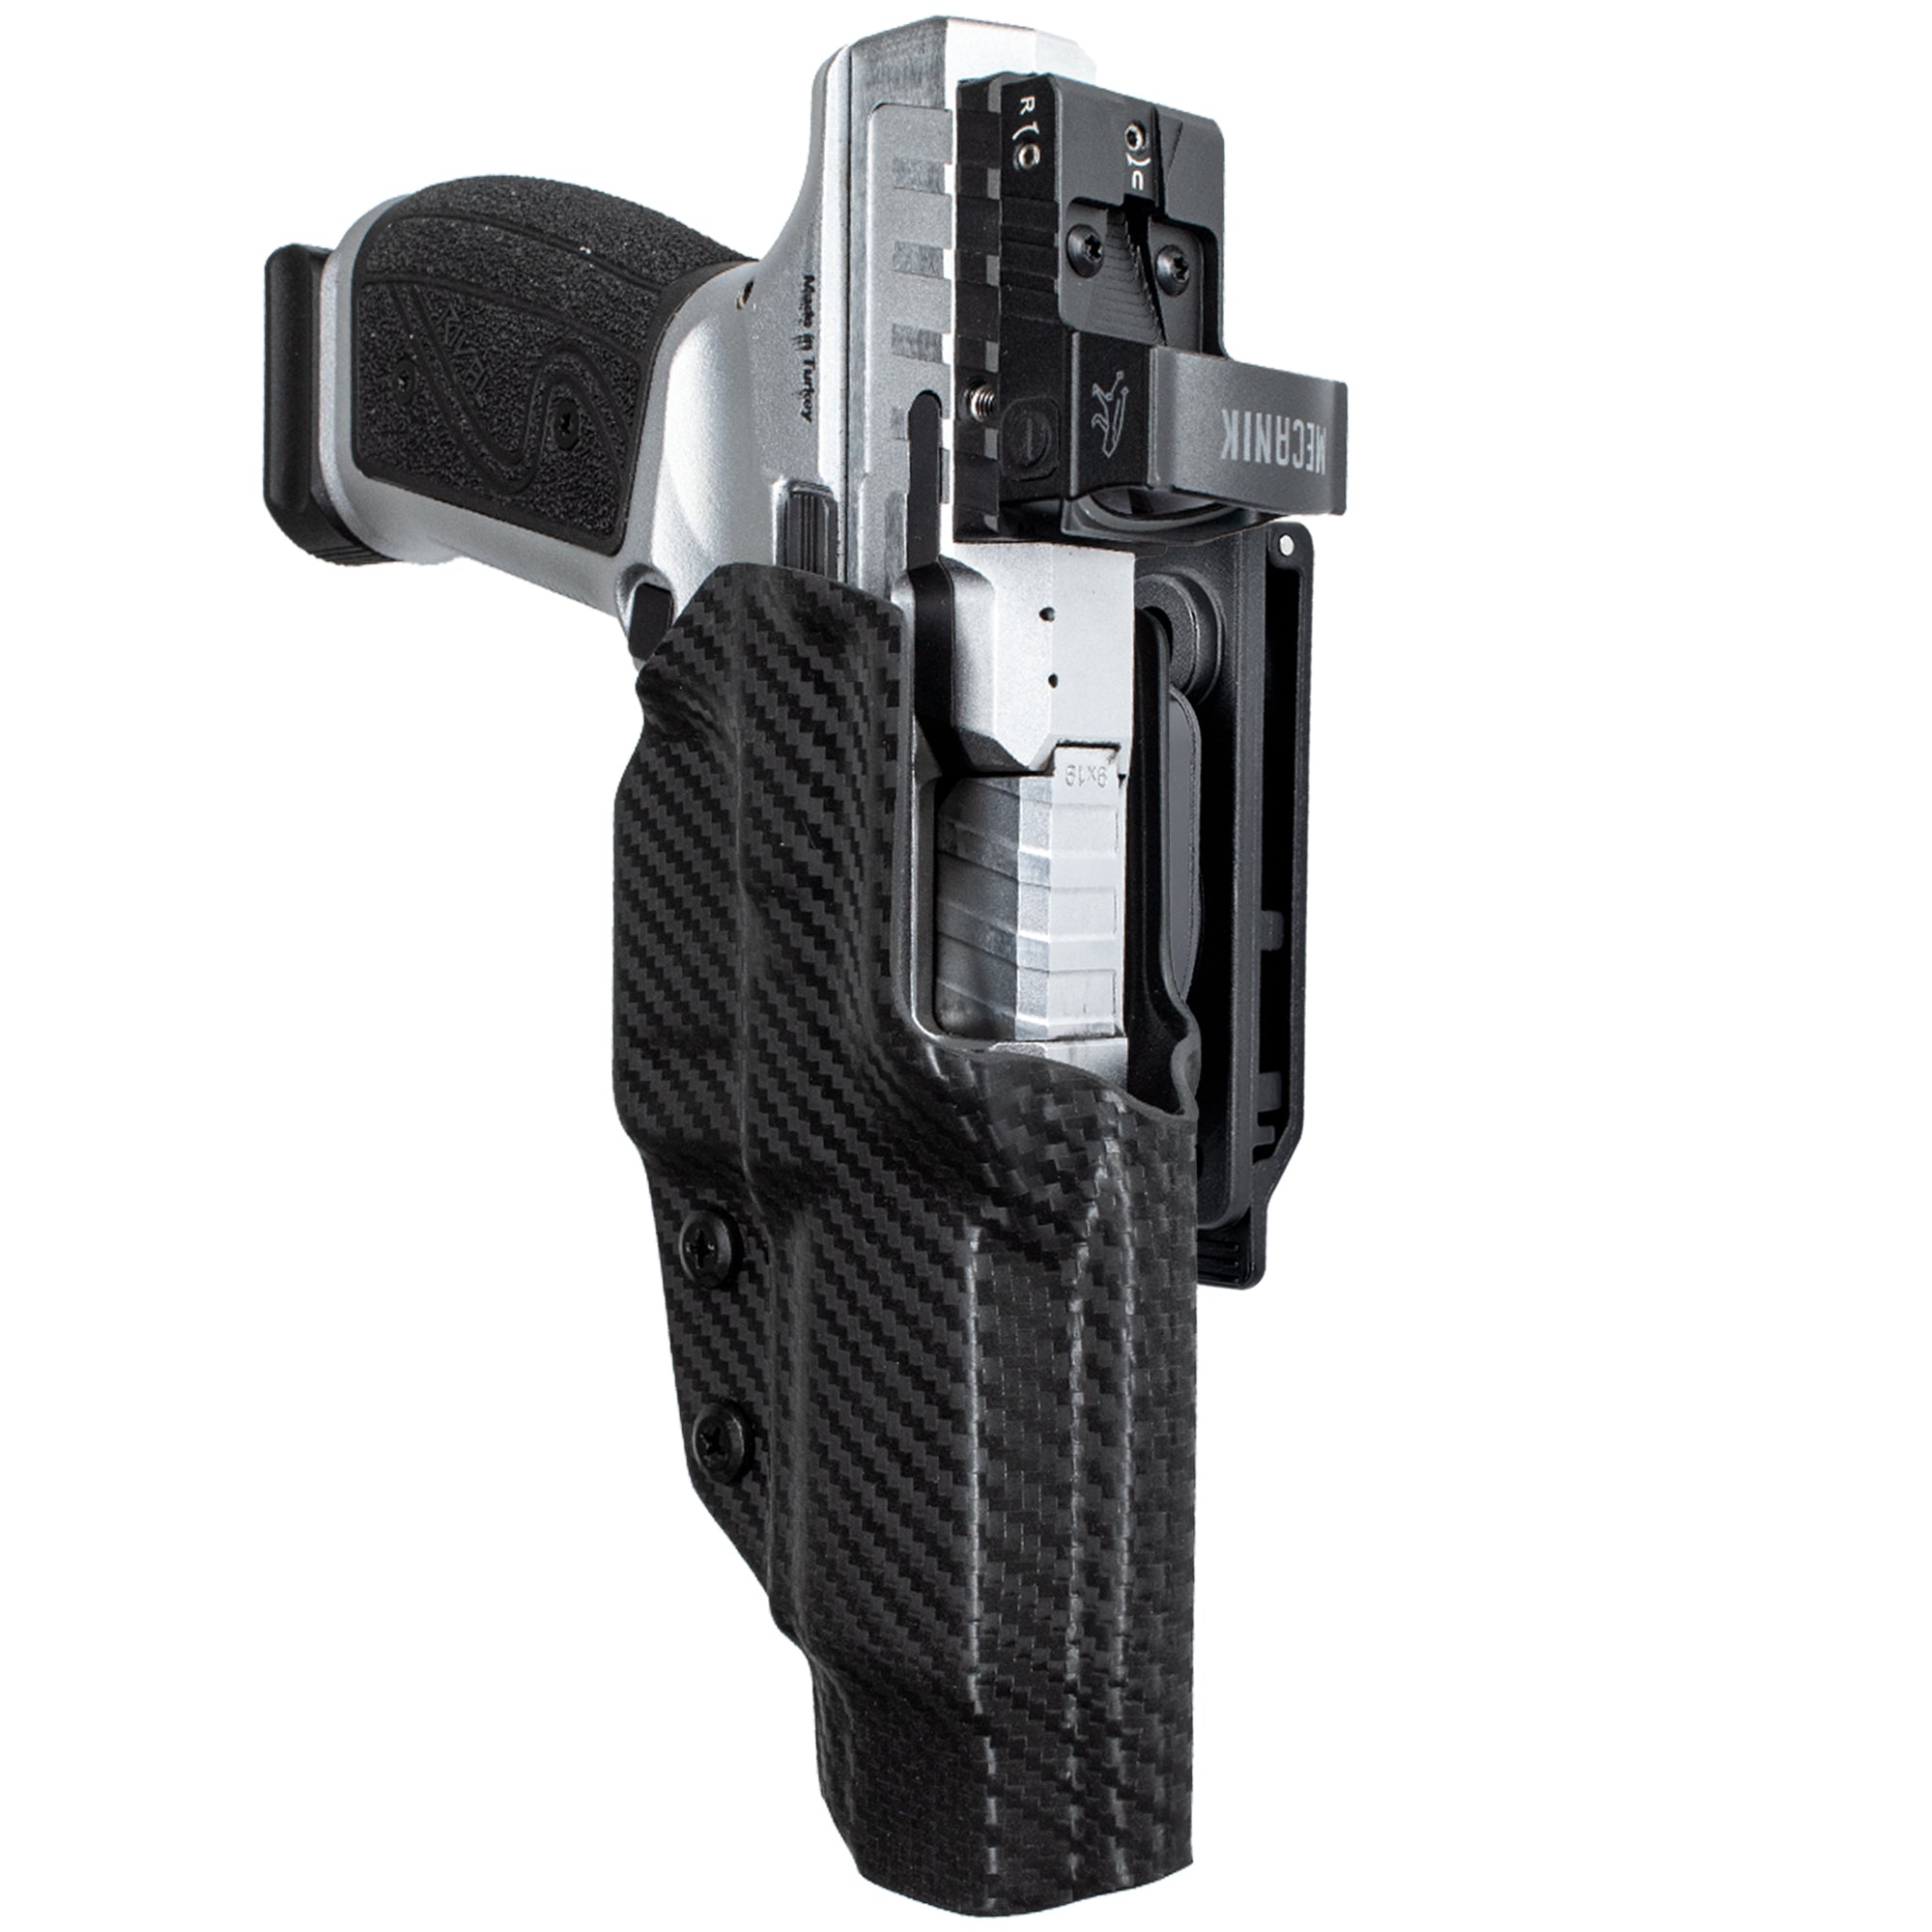 OWB Quick Release IDPA Holster in Carbon Fiber